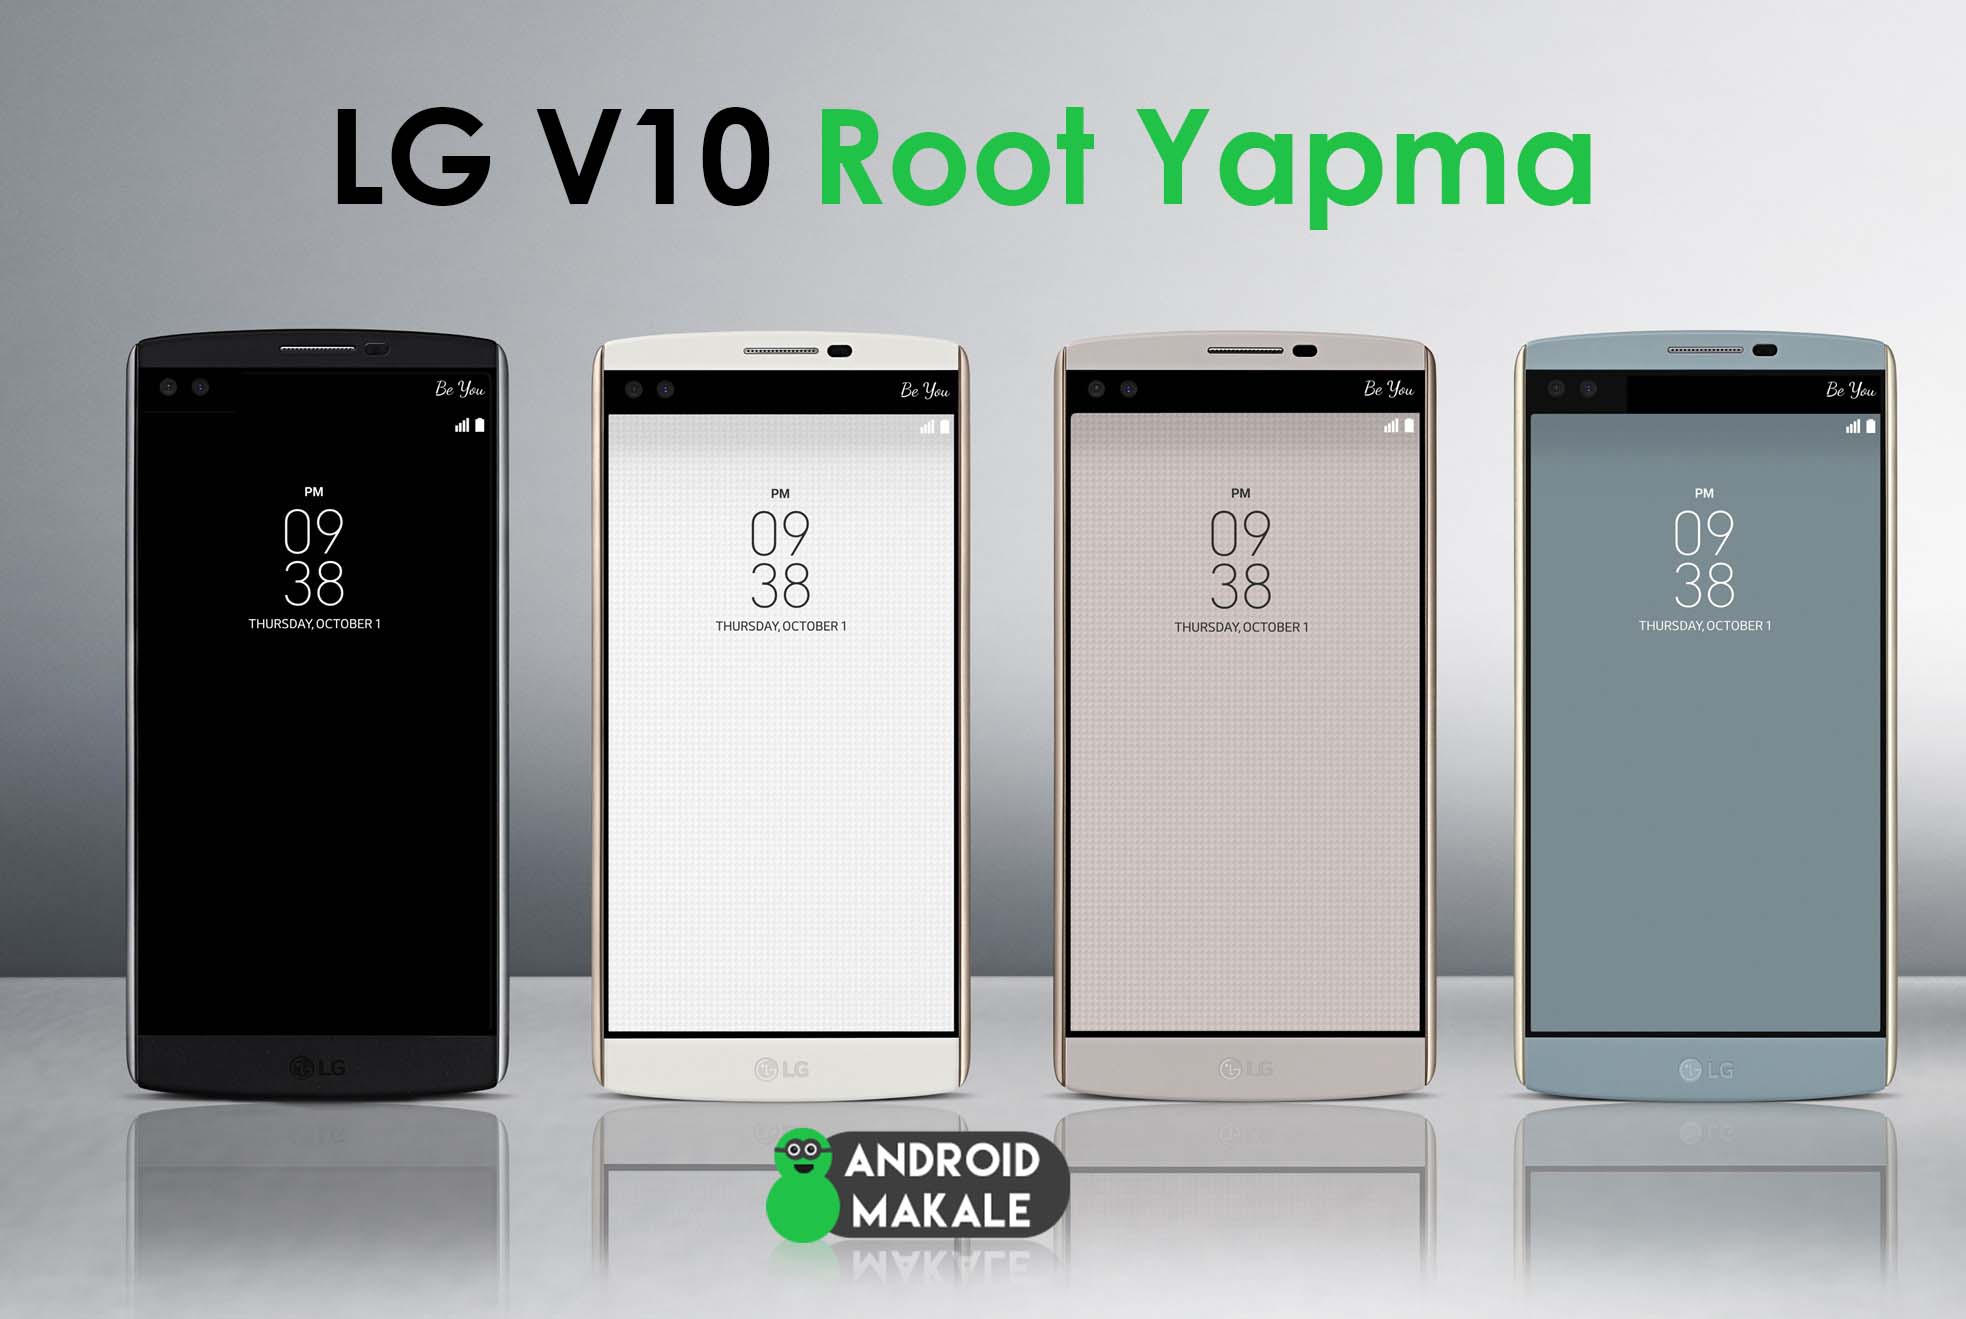 LG V10 SuperSU v2.56 ile Root Yapma İşlemi root rehberi lg v10 supersu lg v10 root yapma lg v10 root rehberi lg v10 recovery moduna alma lg v10 recovery lg v10 how to root how to root lg v10 androidmakale 